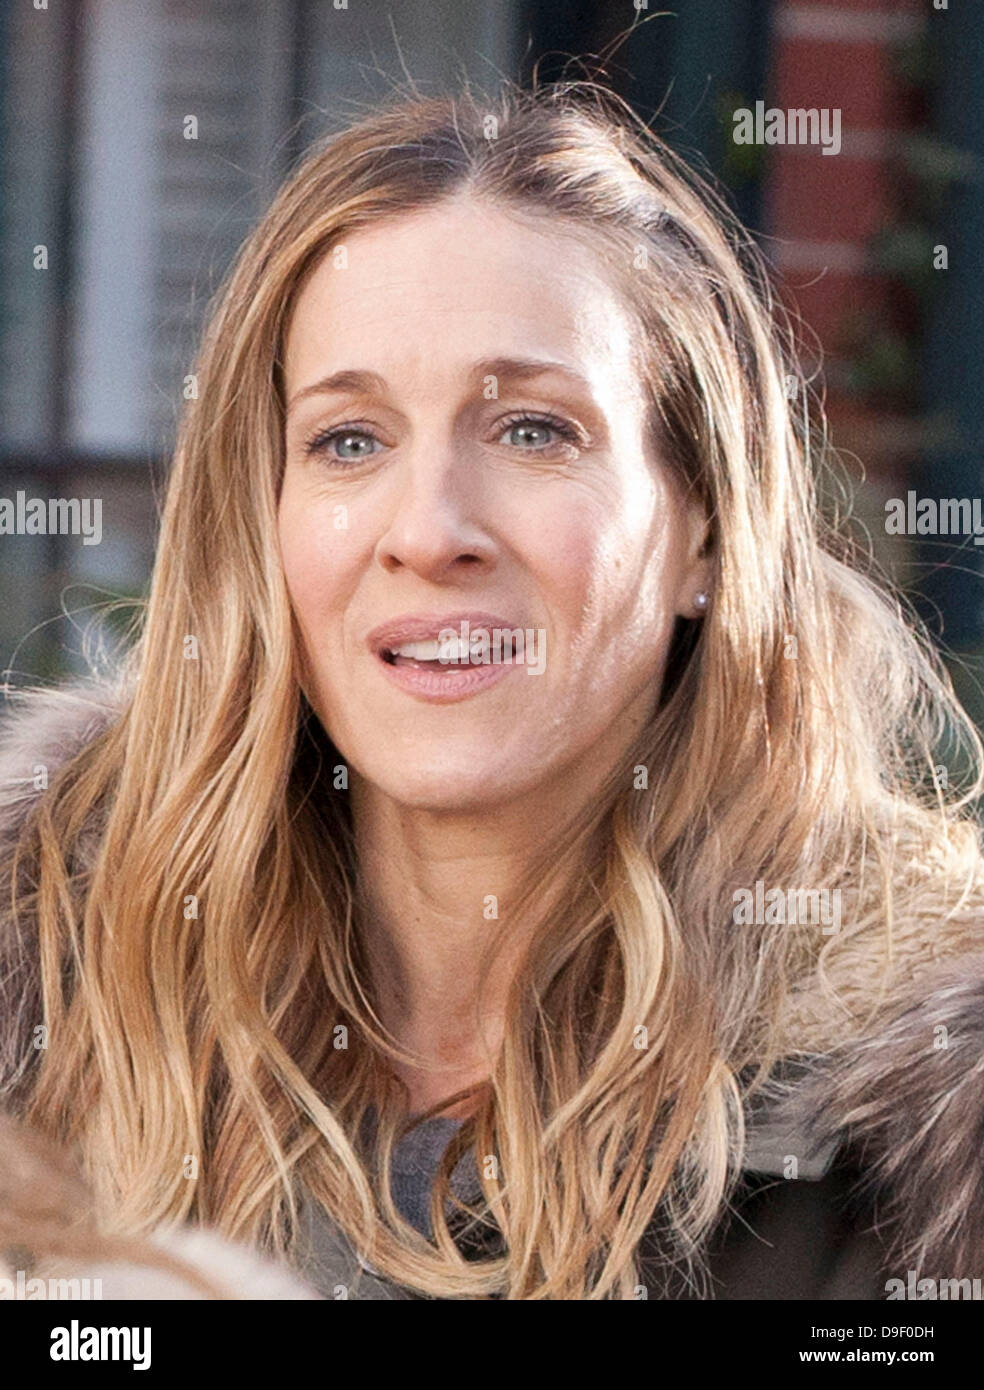 Sarah Jessica Parker seen on the set of "I Don't Know How She Does It" in  Brooklyn Heights New York City, USA - 23.2.2011 Stock Photo - Alamy